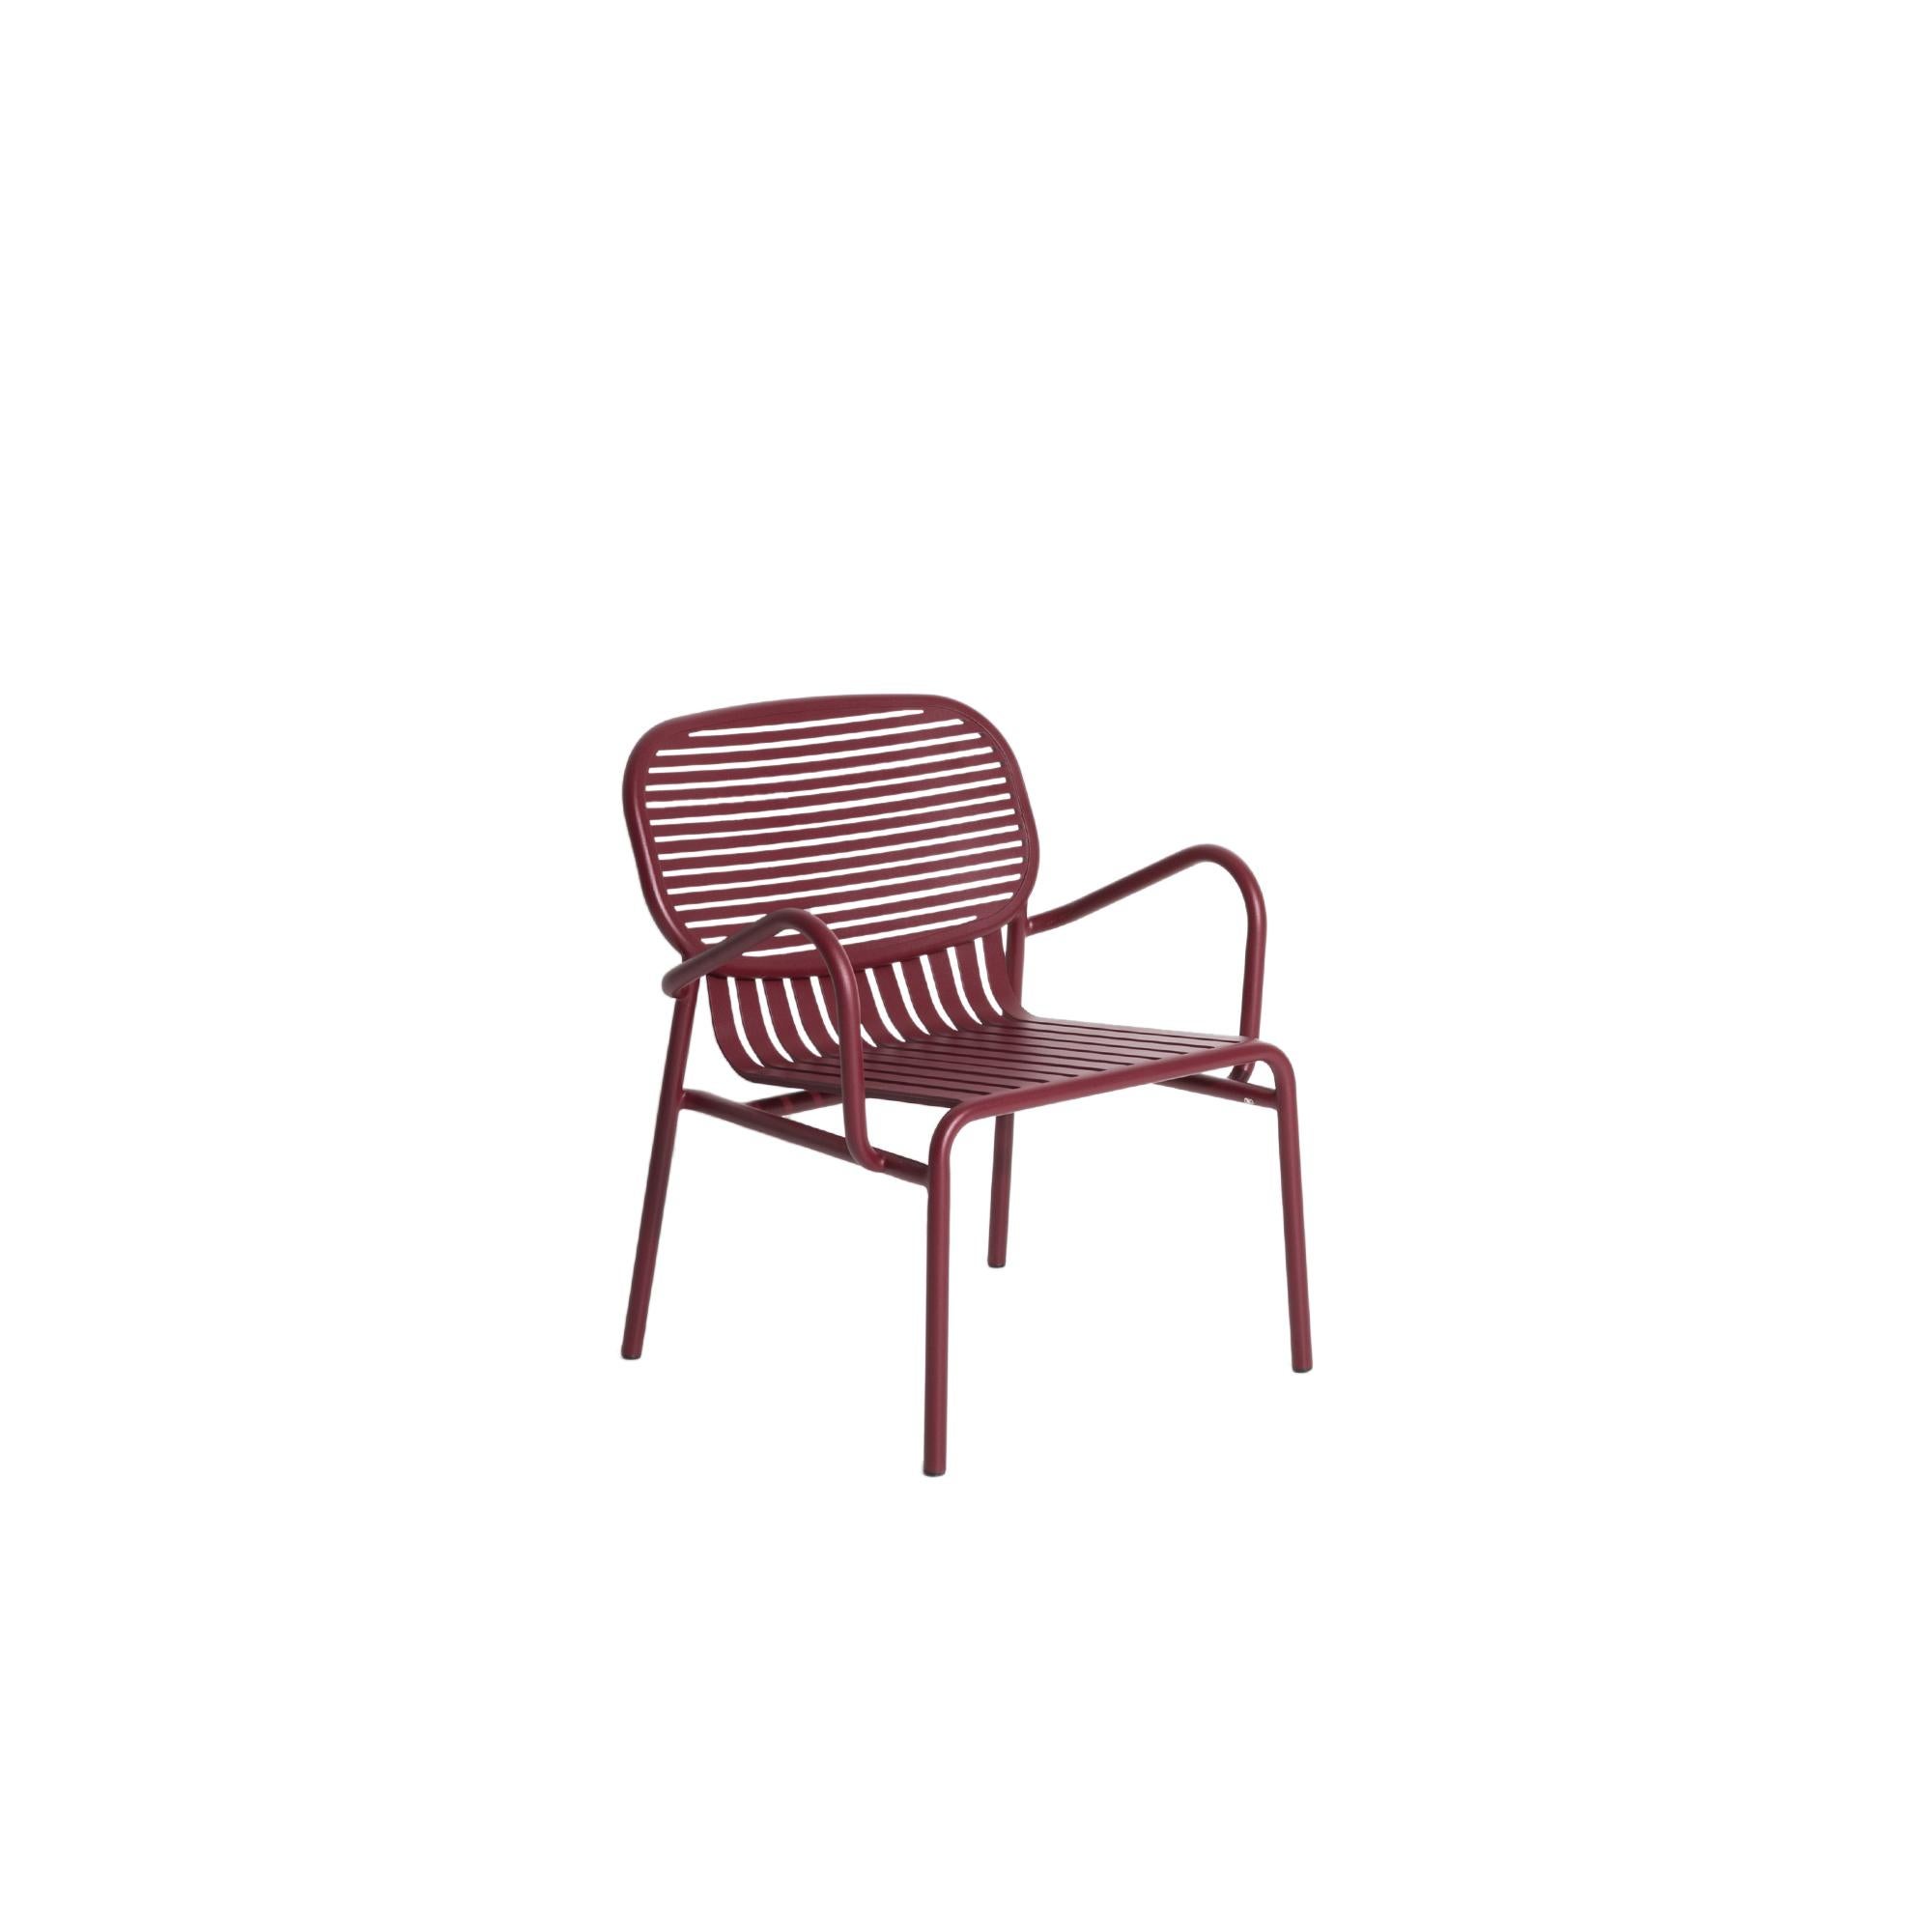 Petite Friture Week-End Armchair in Burgundy Aluminium by Studio BrichetZiegler, 2017

The week-end collection is a full range of outdoor furniture, in aluminium grained epoxy paint, matt finish, that includes 18 functions and 8 colours for the